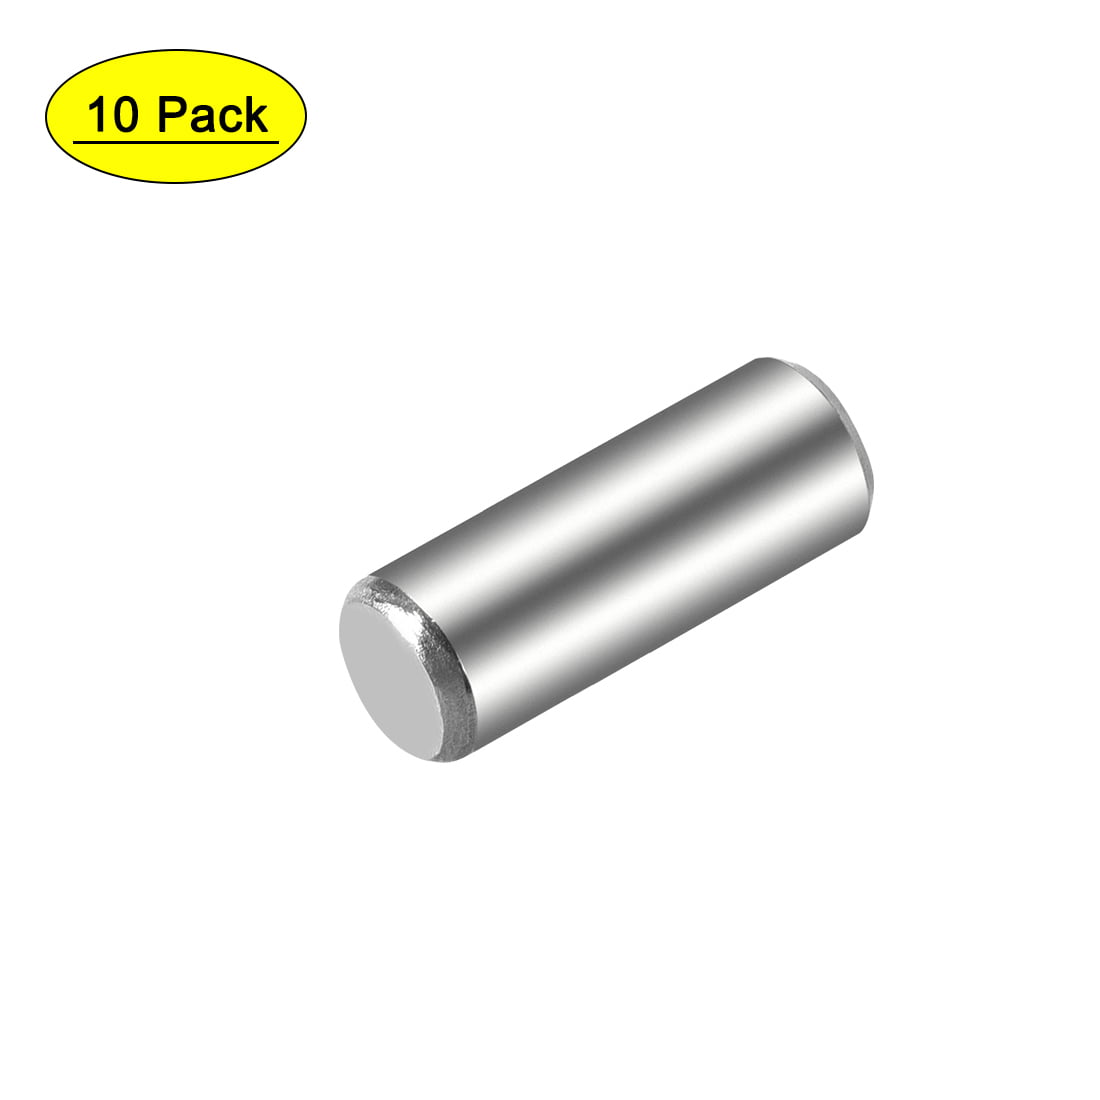 Pack of 200 pcs Details about   Dowel Pin 3/8 x 3/4 Cylindrical Pin Alloy Steel Plain Hardened 